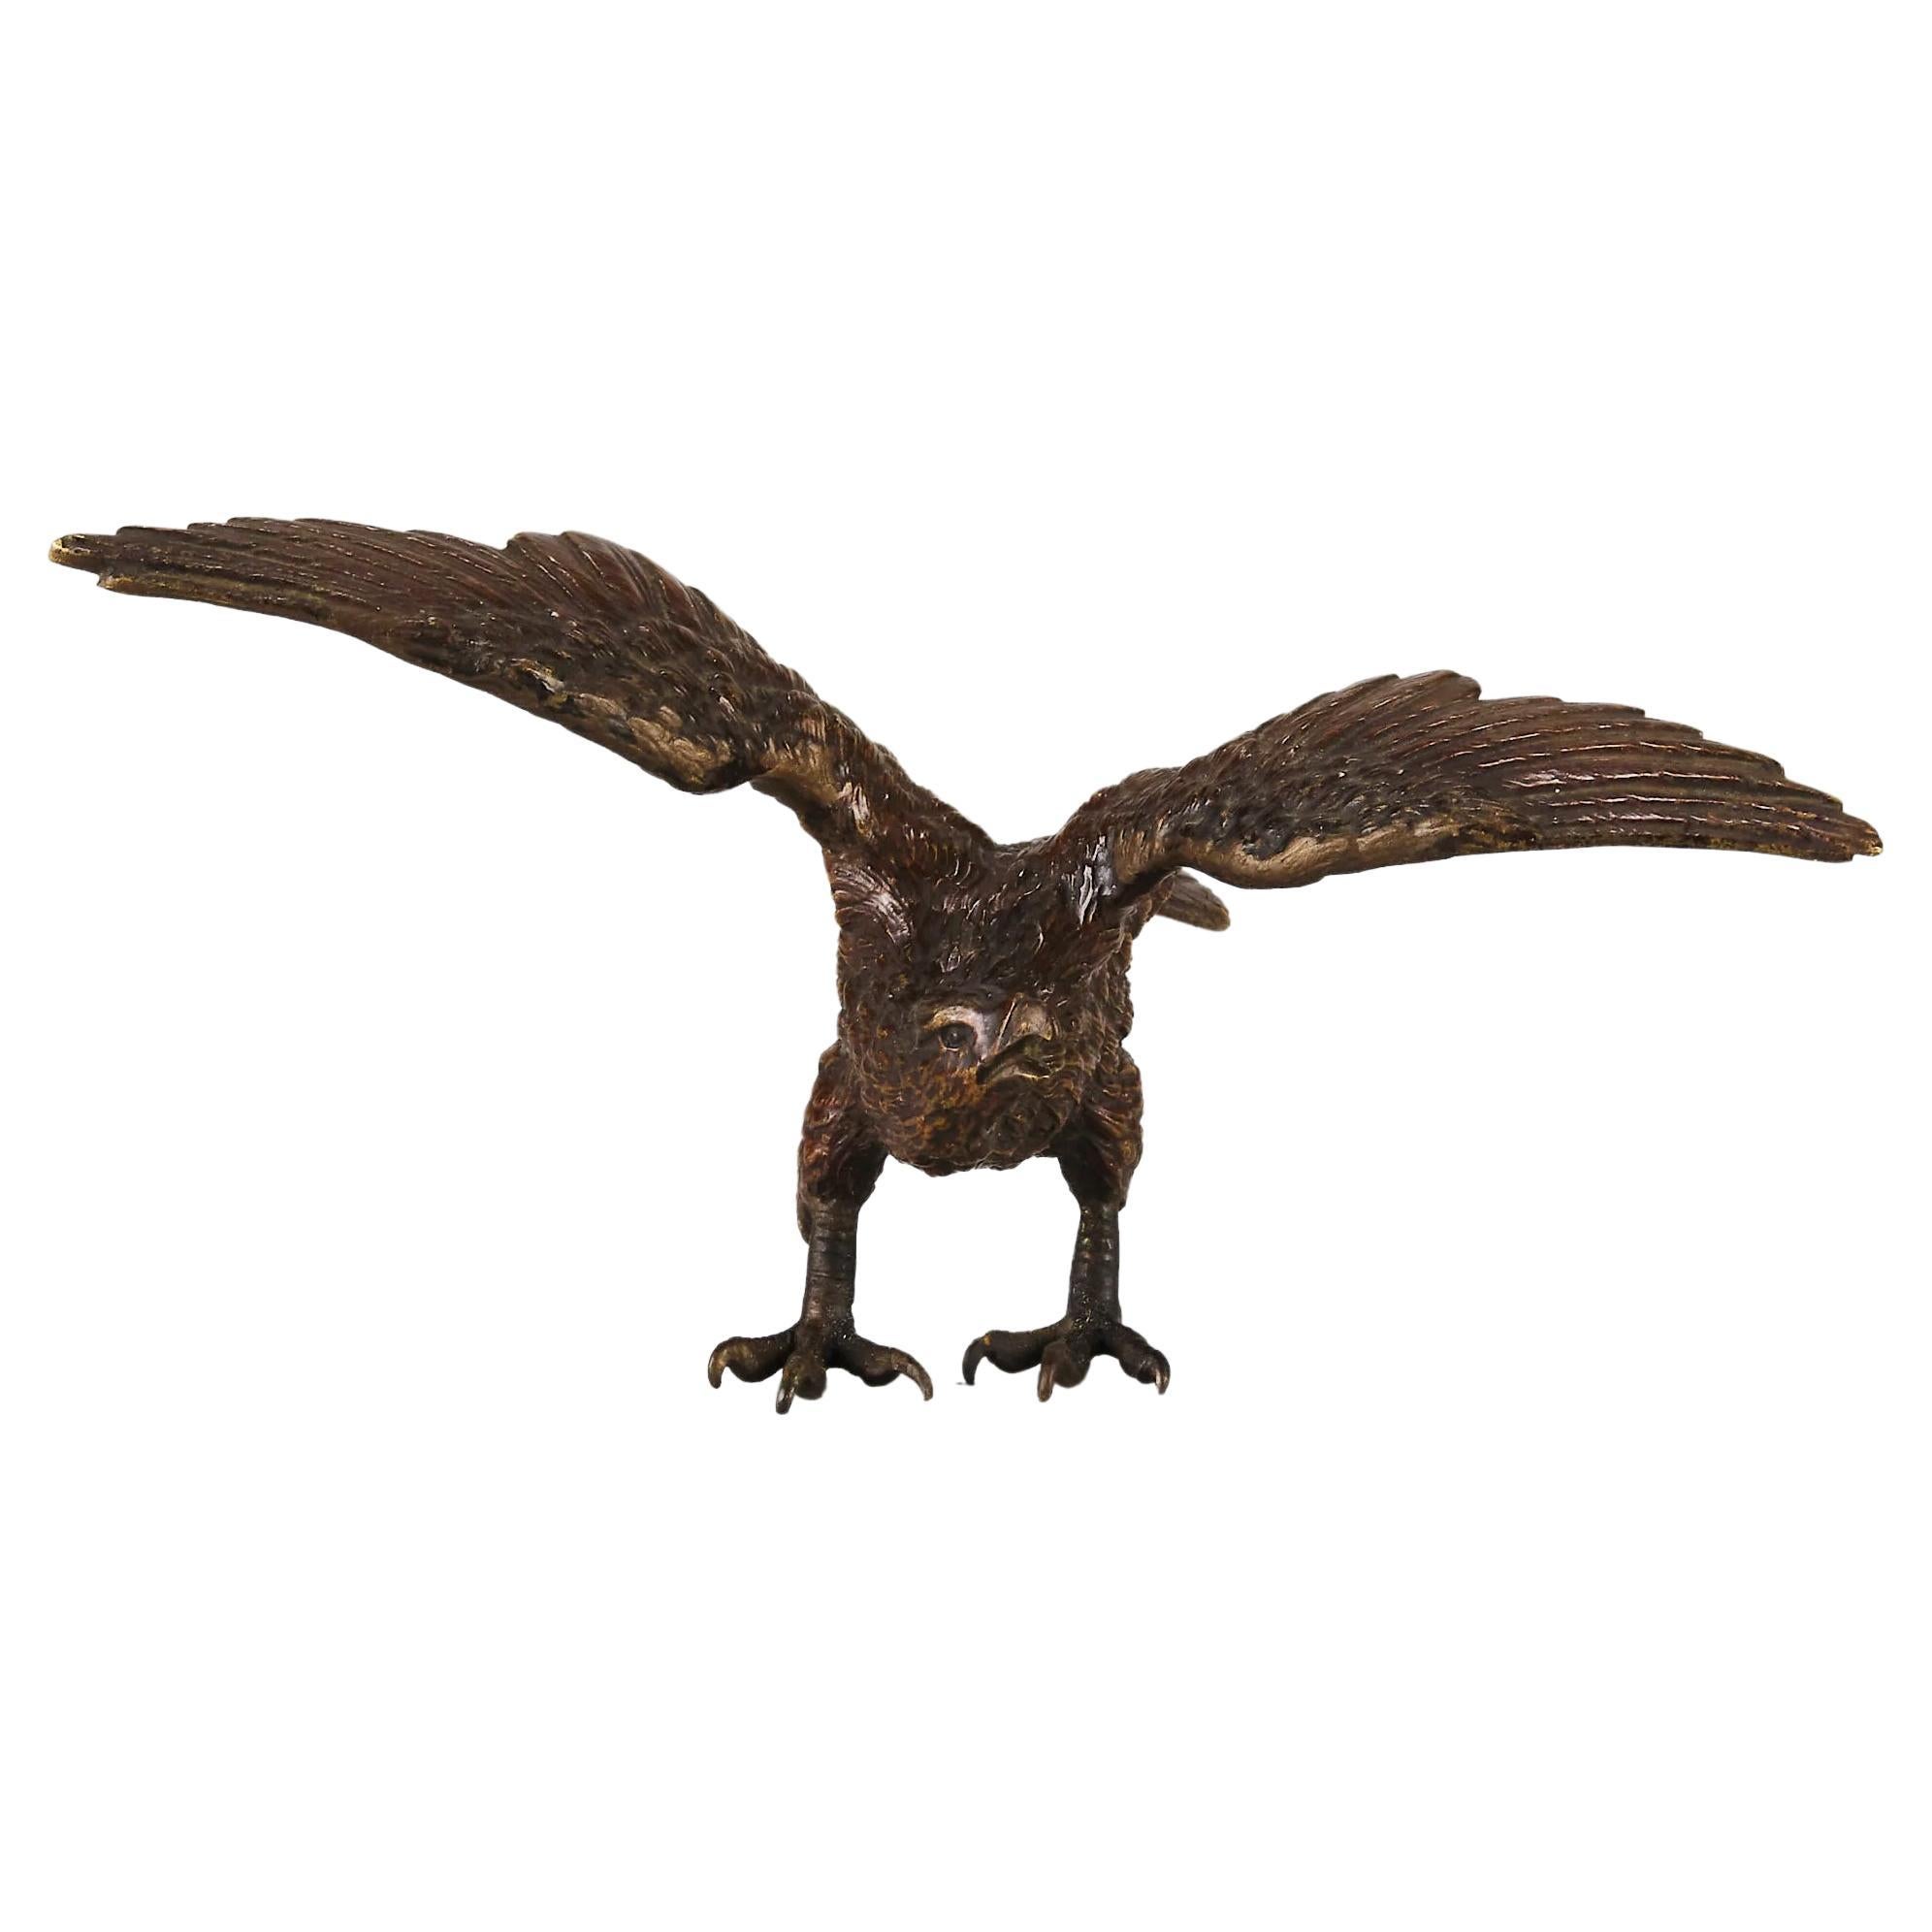 Cold-Painted Bronze Sculpture entitled "Eagle with Outspread Wings" by Bergman